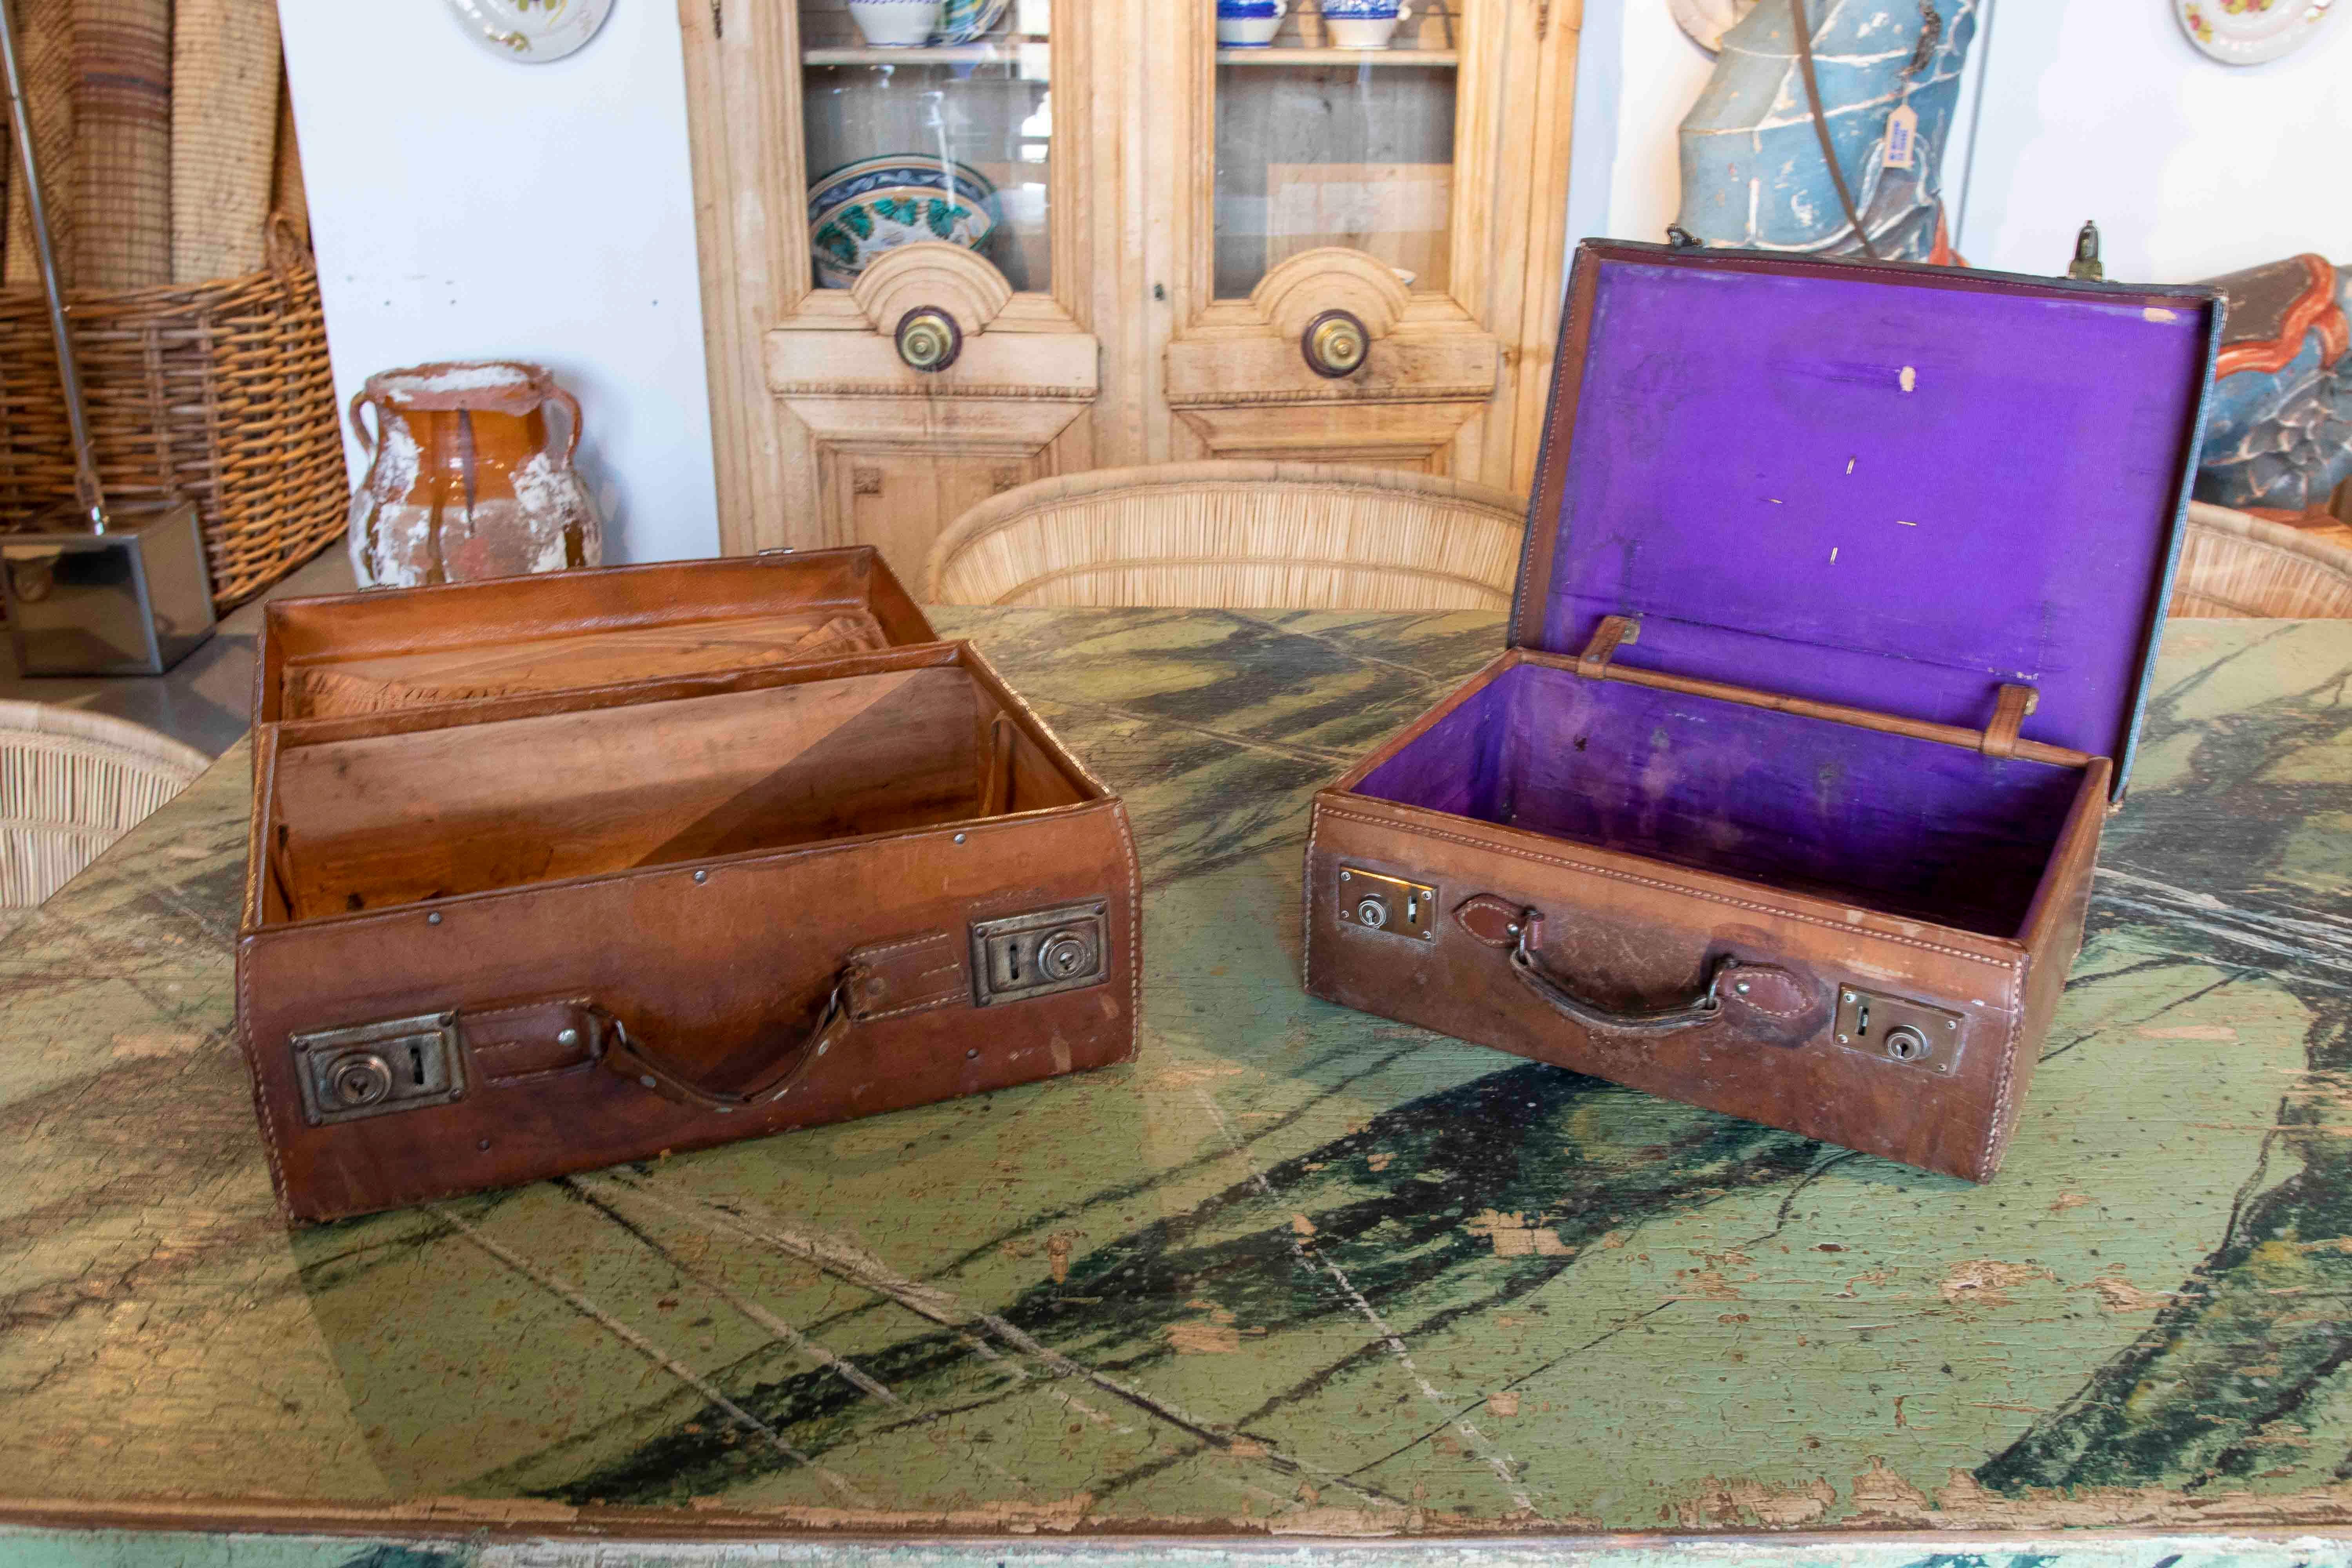 19th century Pair of Leather Travelling Suitcases with Bronze Initials

Large suitcase: 30x45x15cm
Small suitcase: 30x40x14cm.